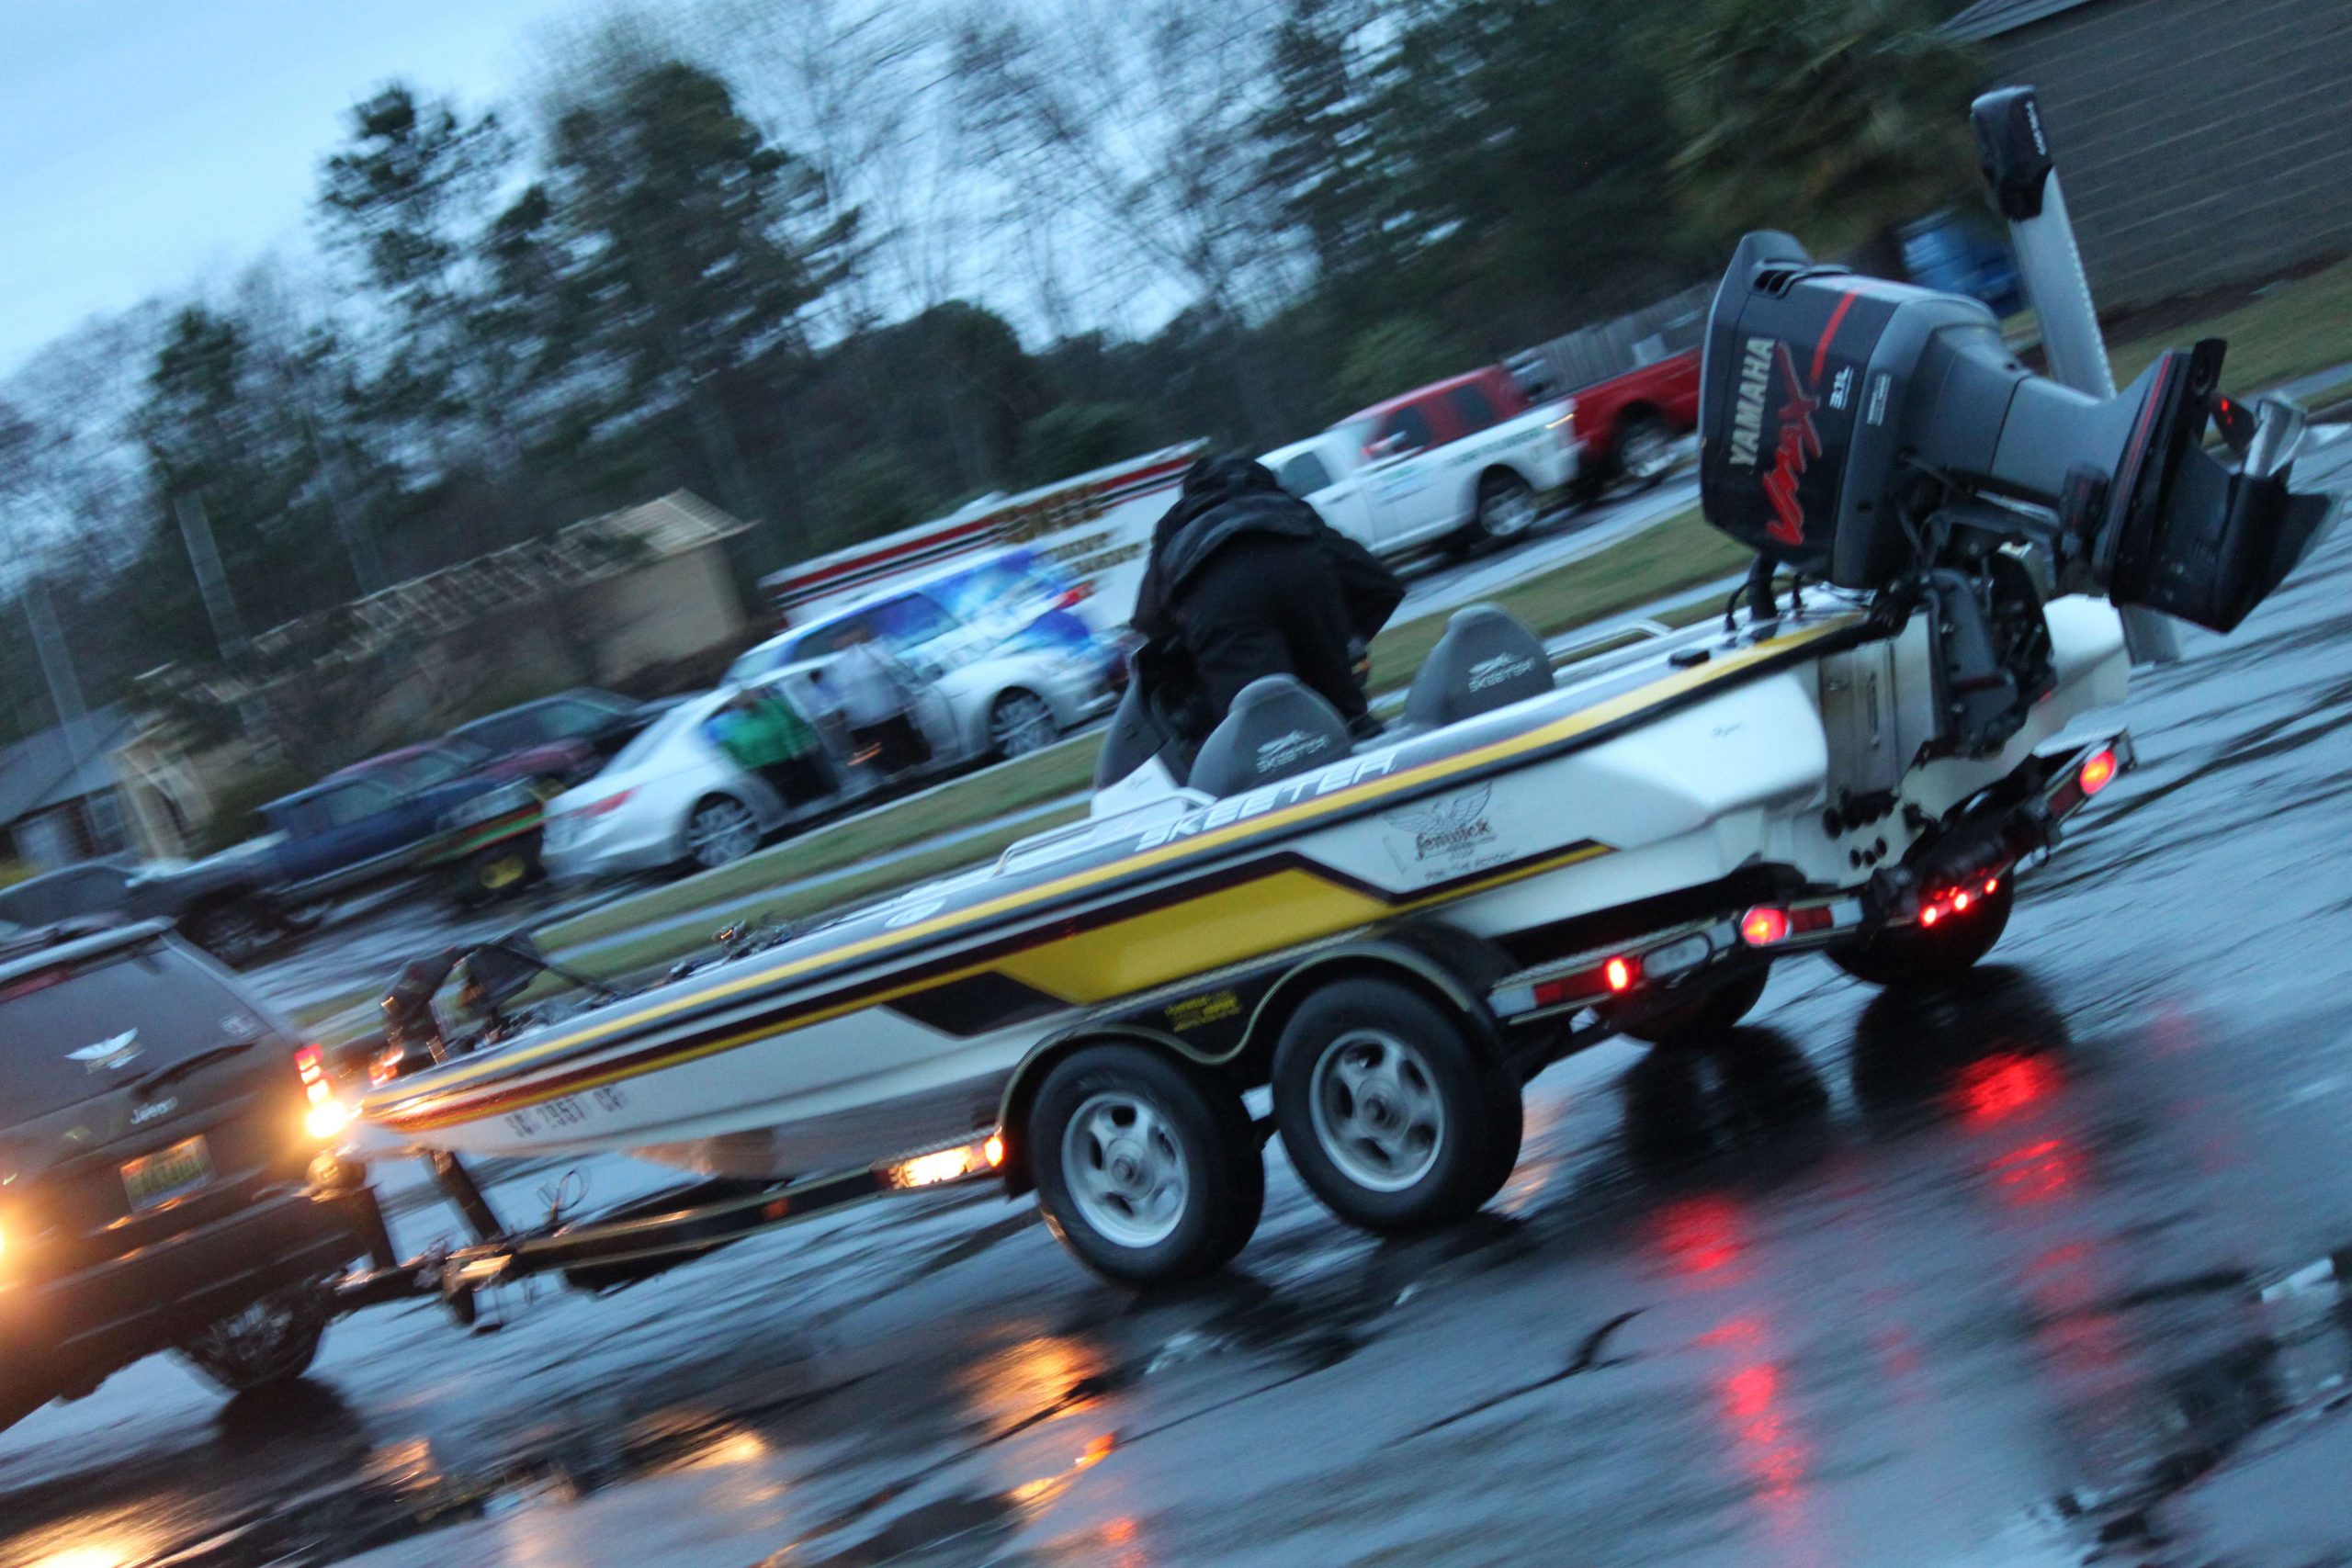 The parking area gets busy as more than 100 boats arrive for Day 2 of the Carhartt College Eastern Regional.